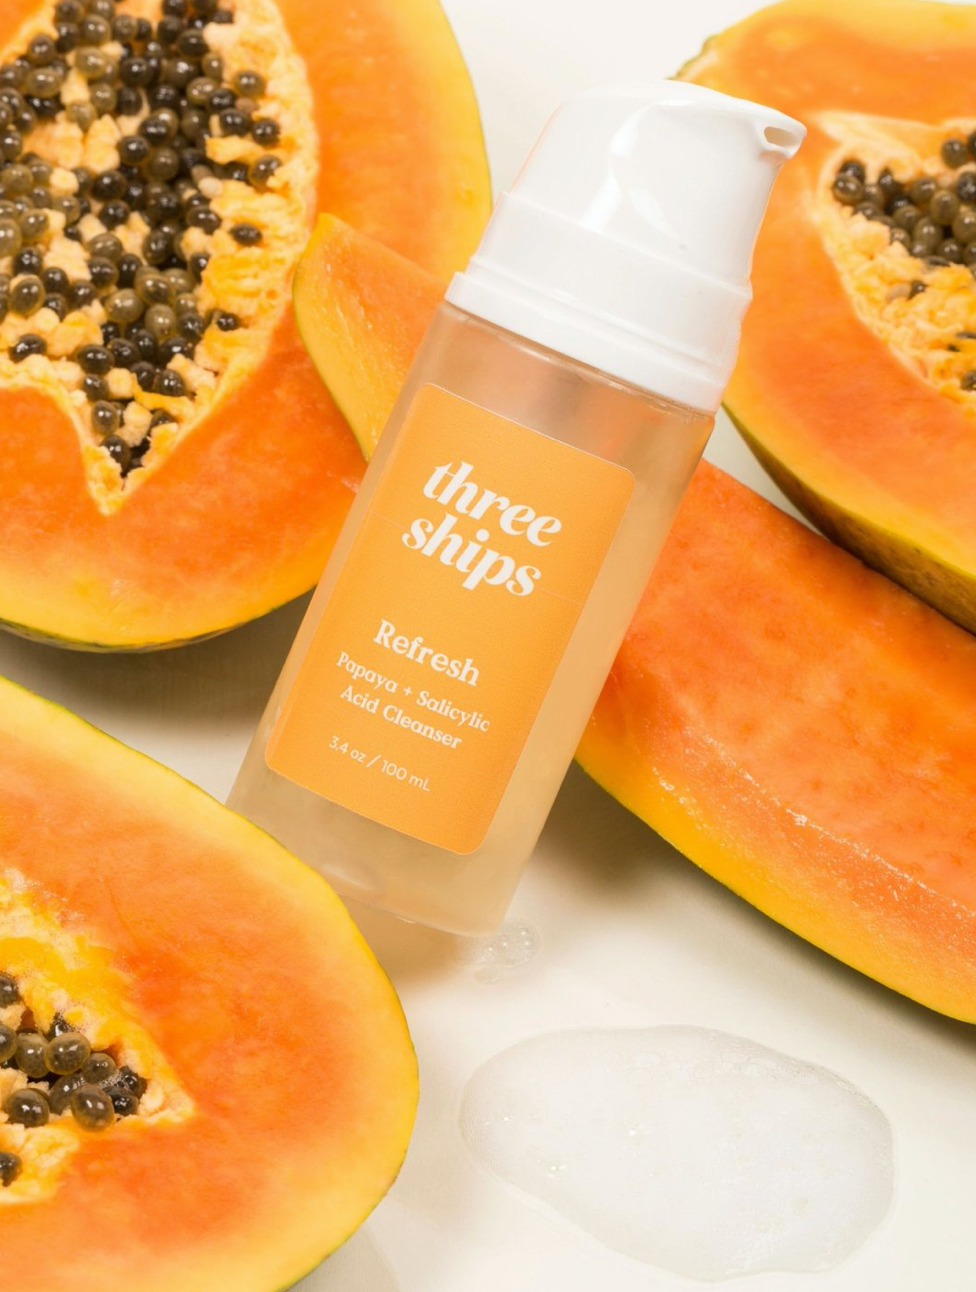 UNIKONCEPT Lifestyle Boutique and Lounge; Three Ships Refresh Papaya and Salicylic Acid Cleanser featured with papayas